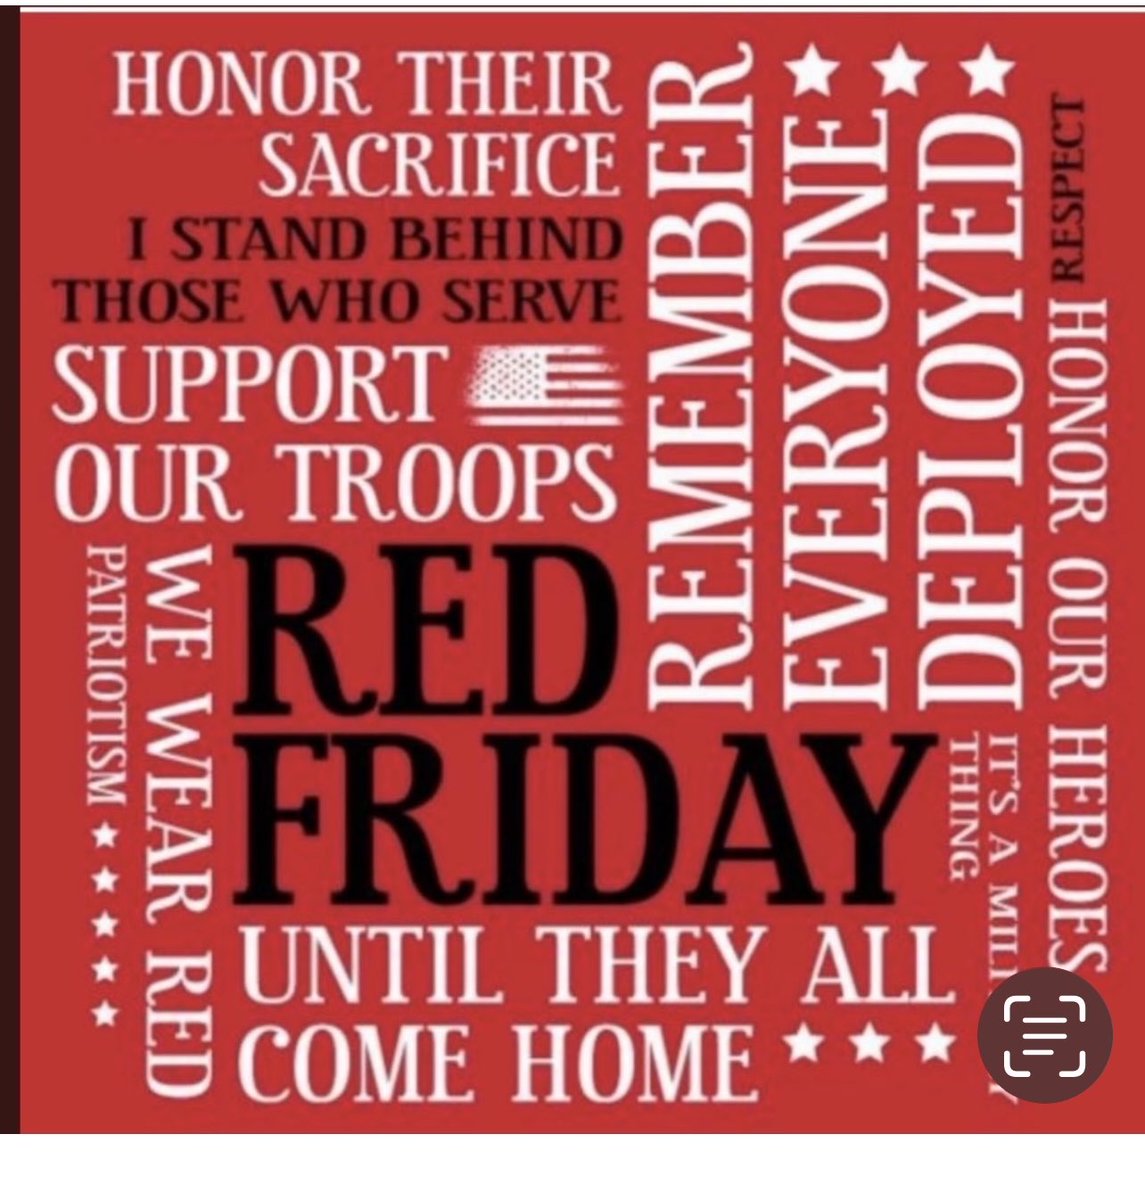 Please take a Minute to Thank these Amazing People who defend us. Please Remember those Deployed Soldiers and those Soldiers that are home. Their sacrifices are many . I send my Utmost Respect to All the Men and Women who defend our Freedom. Stay safe. 🫡♥️🇺🇸🇬🇧🇨🇦🇦🇺🇺🇳